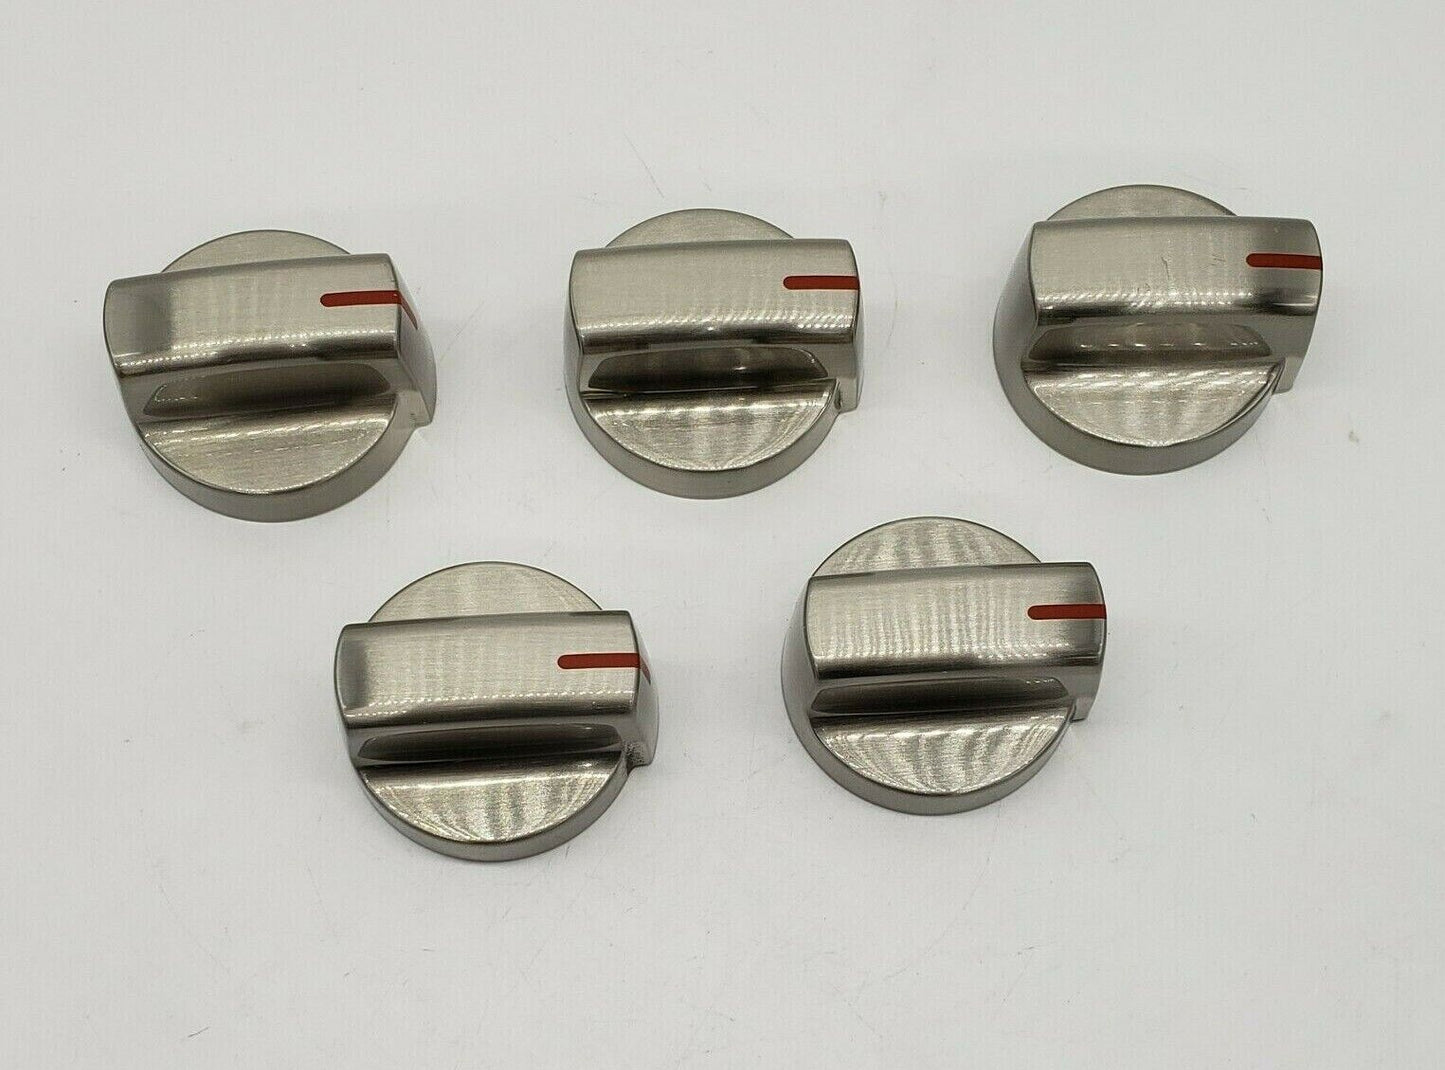 NEW Replacement for Frigidaire Oven Stainless Control Knobs (set 5) - A067501